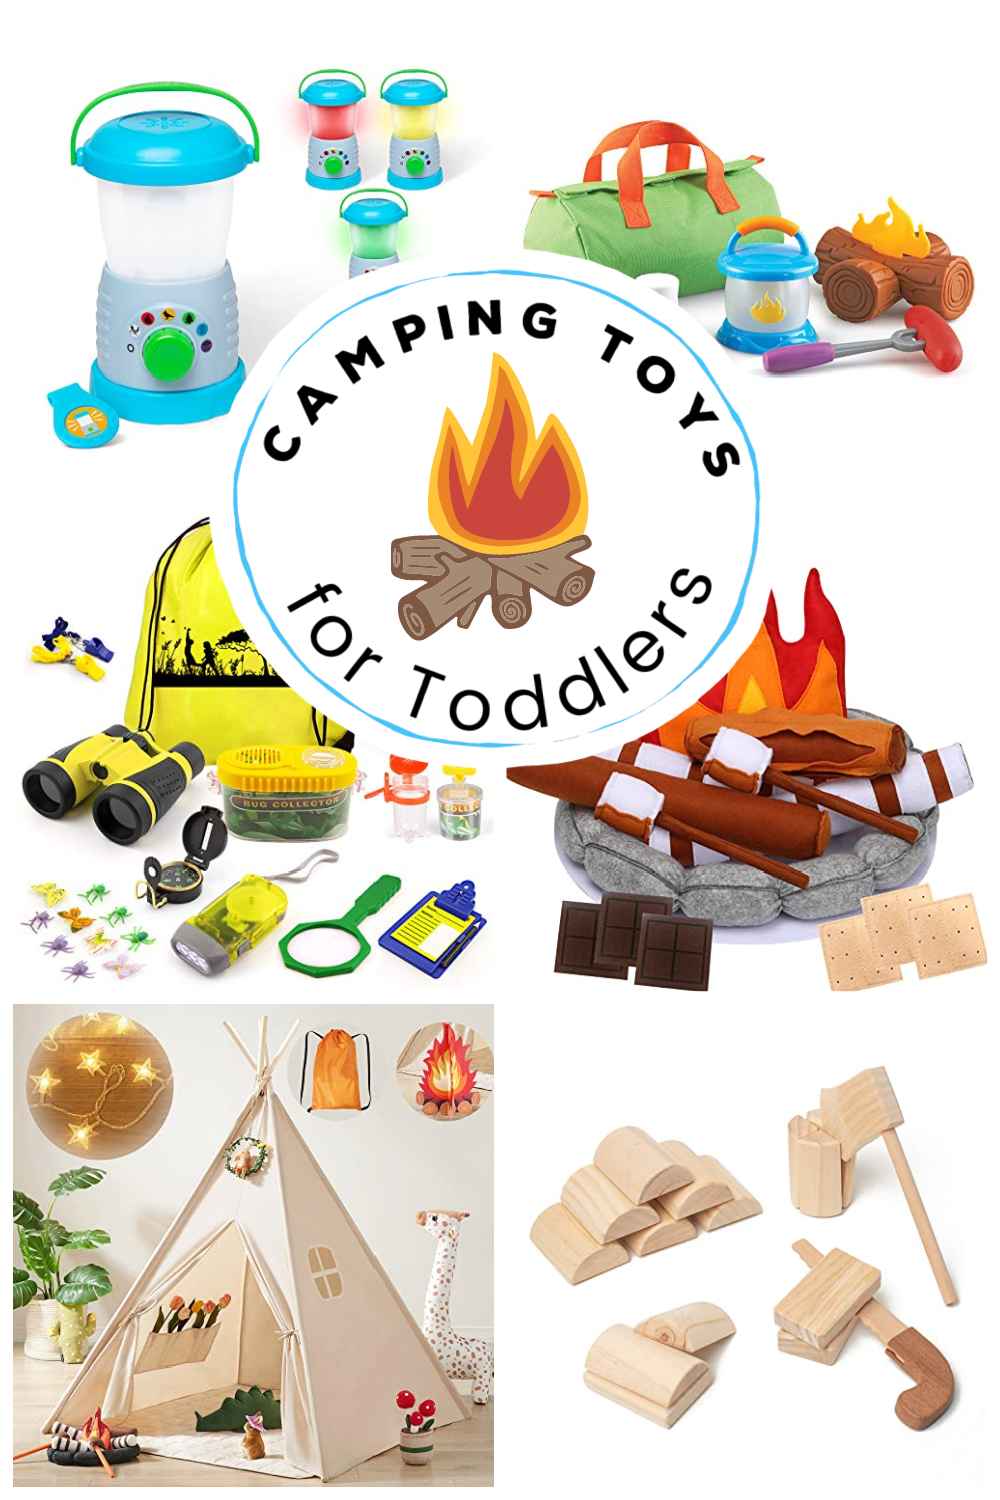 camping-toys-3 Camping Toys for Toddlers